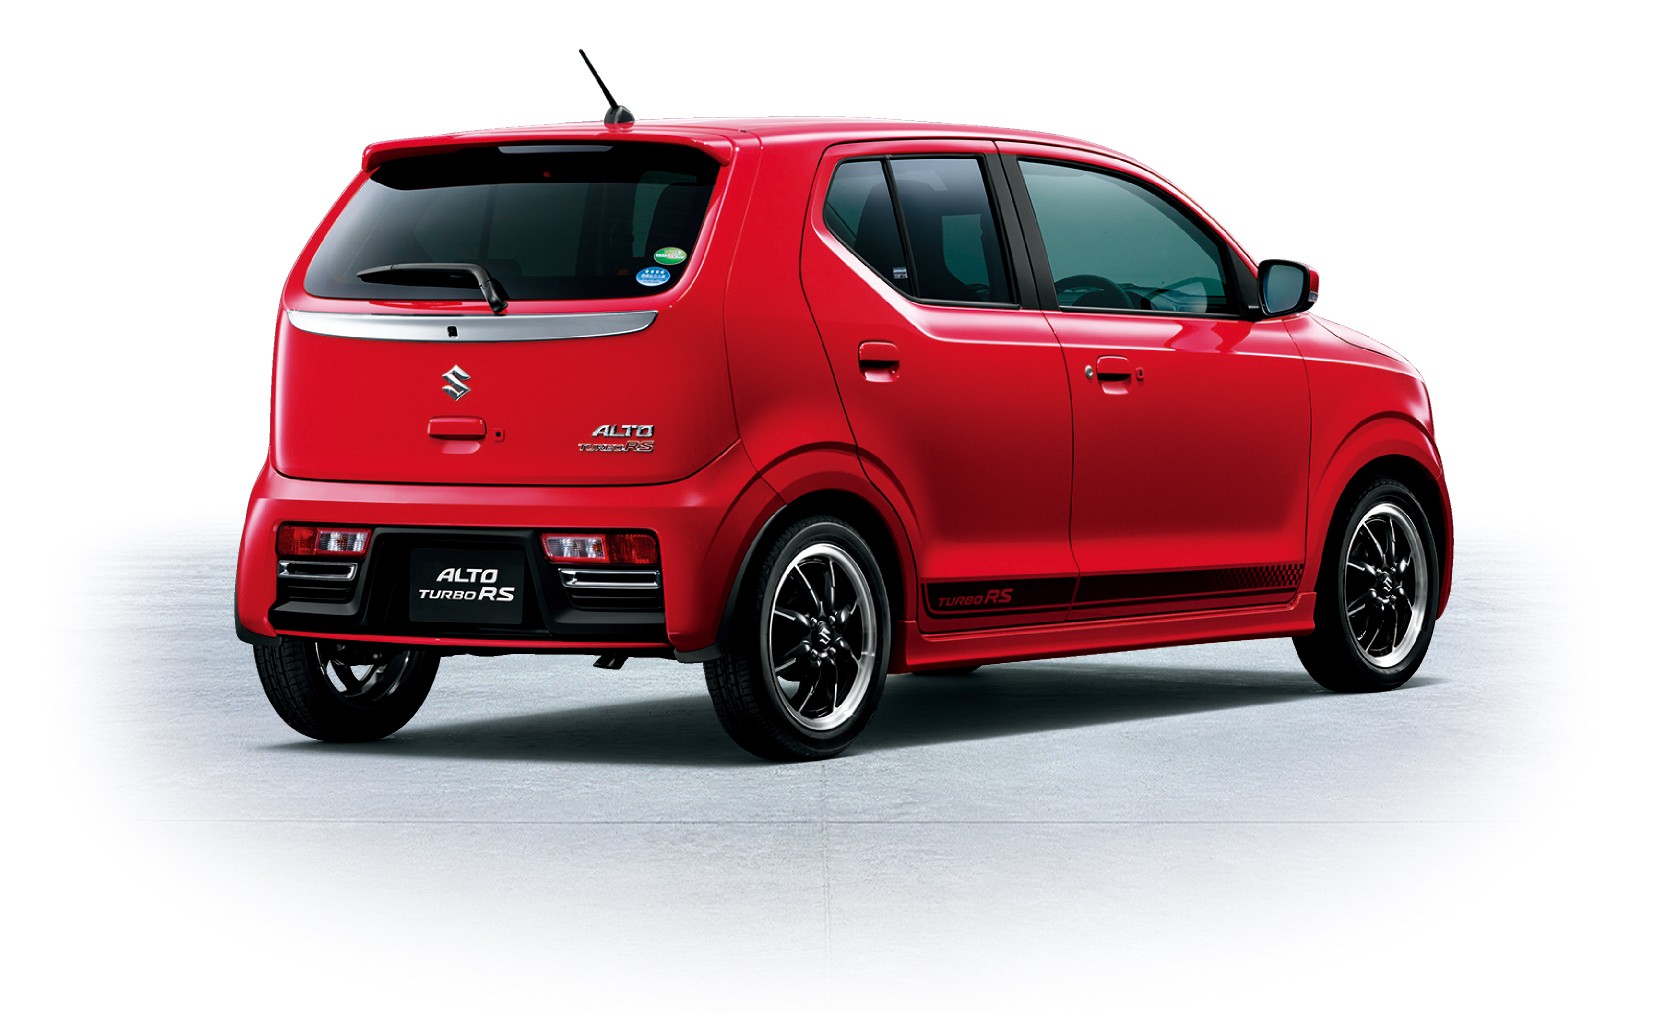 2015-suzuki-alto-turbo-rs-is-pocket-racer-from-japan-video-photo-gallery_1.jpg